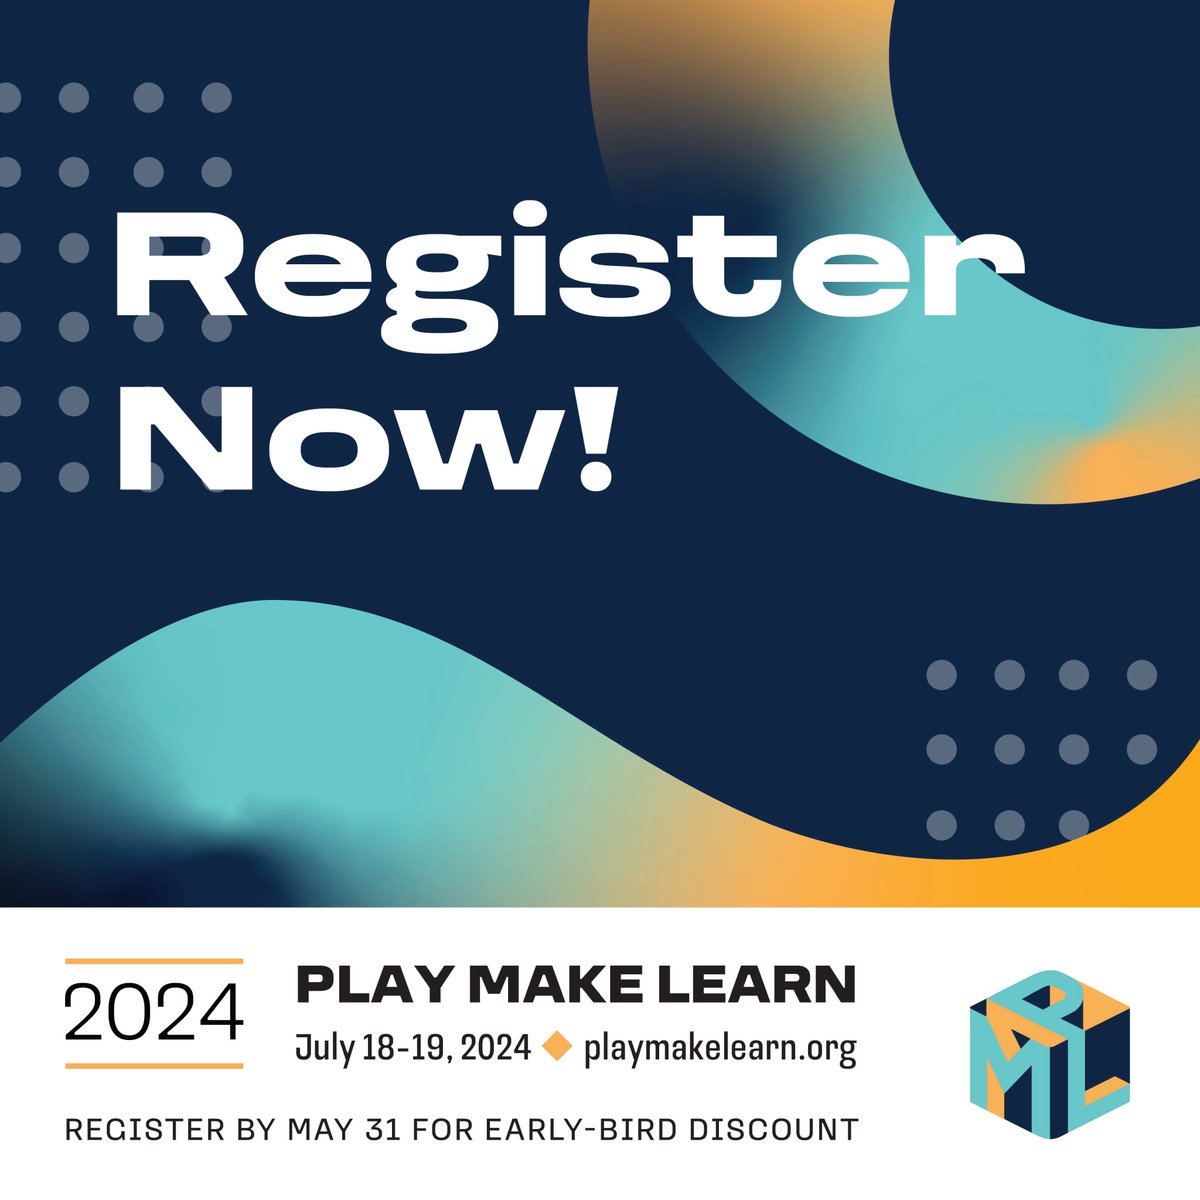 Pre-Conference workshops are filling up for Play Make Learn 2024. Take a deep dive into micro-credentials, maker educator leadership, tinkering, assessment and more. #makered #tinkering @Play_Make_Learn